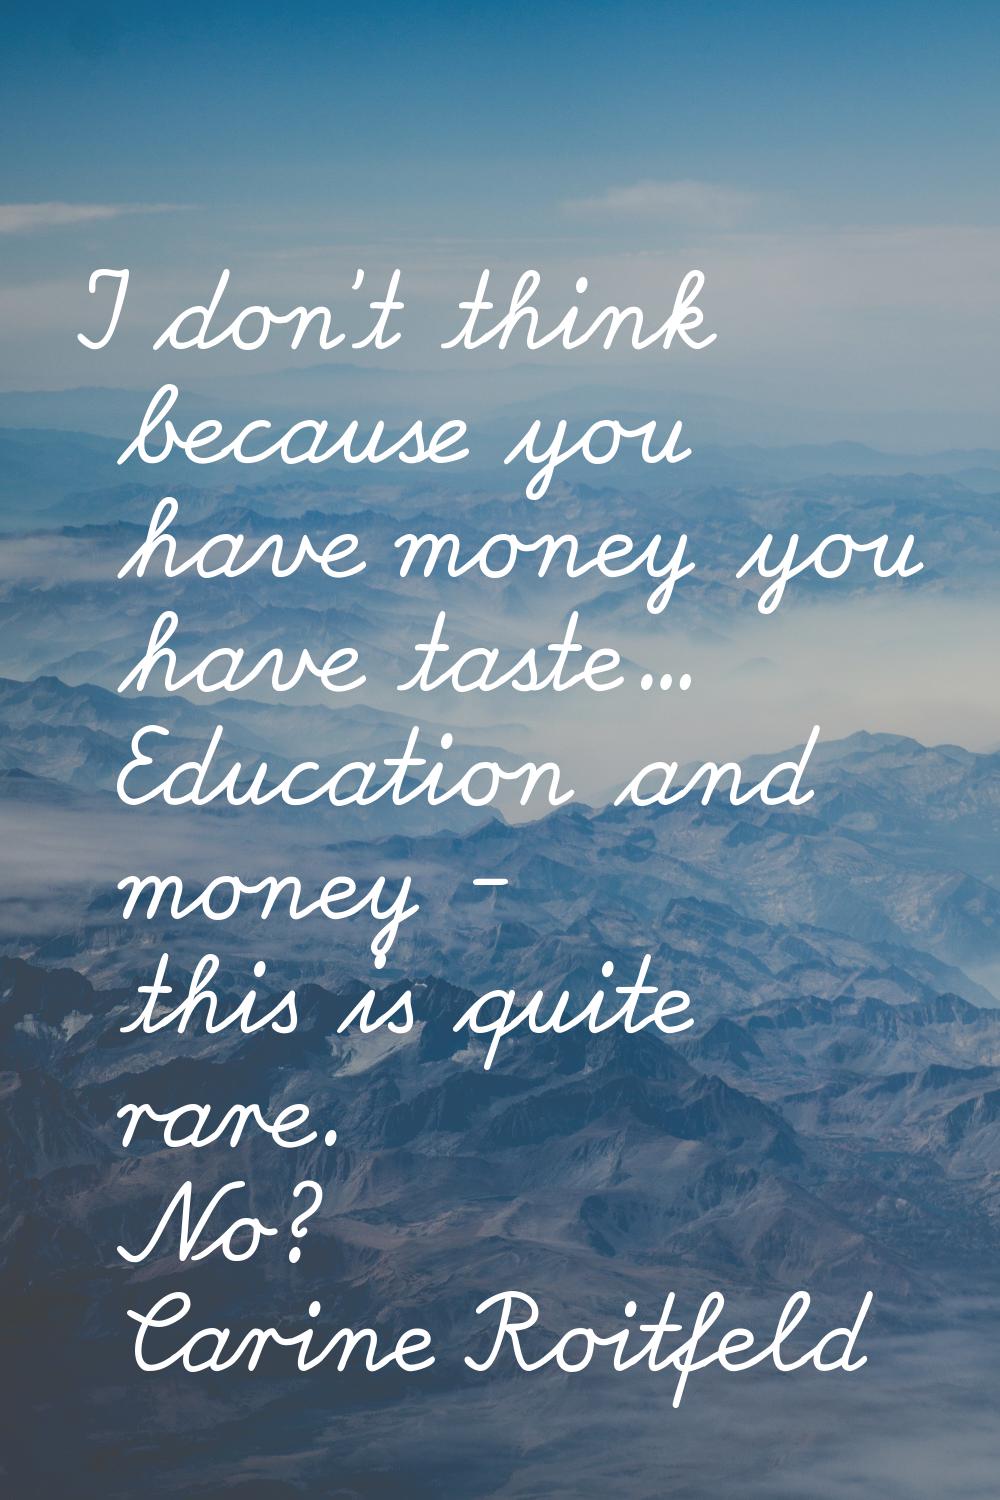 I don't think because you have money you have taste... Education and money - this is quite rare. No